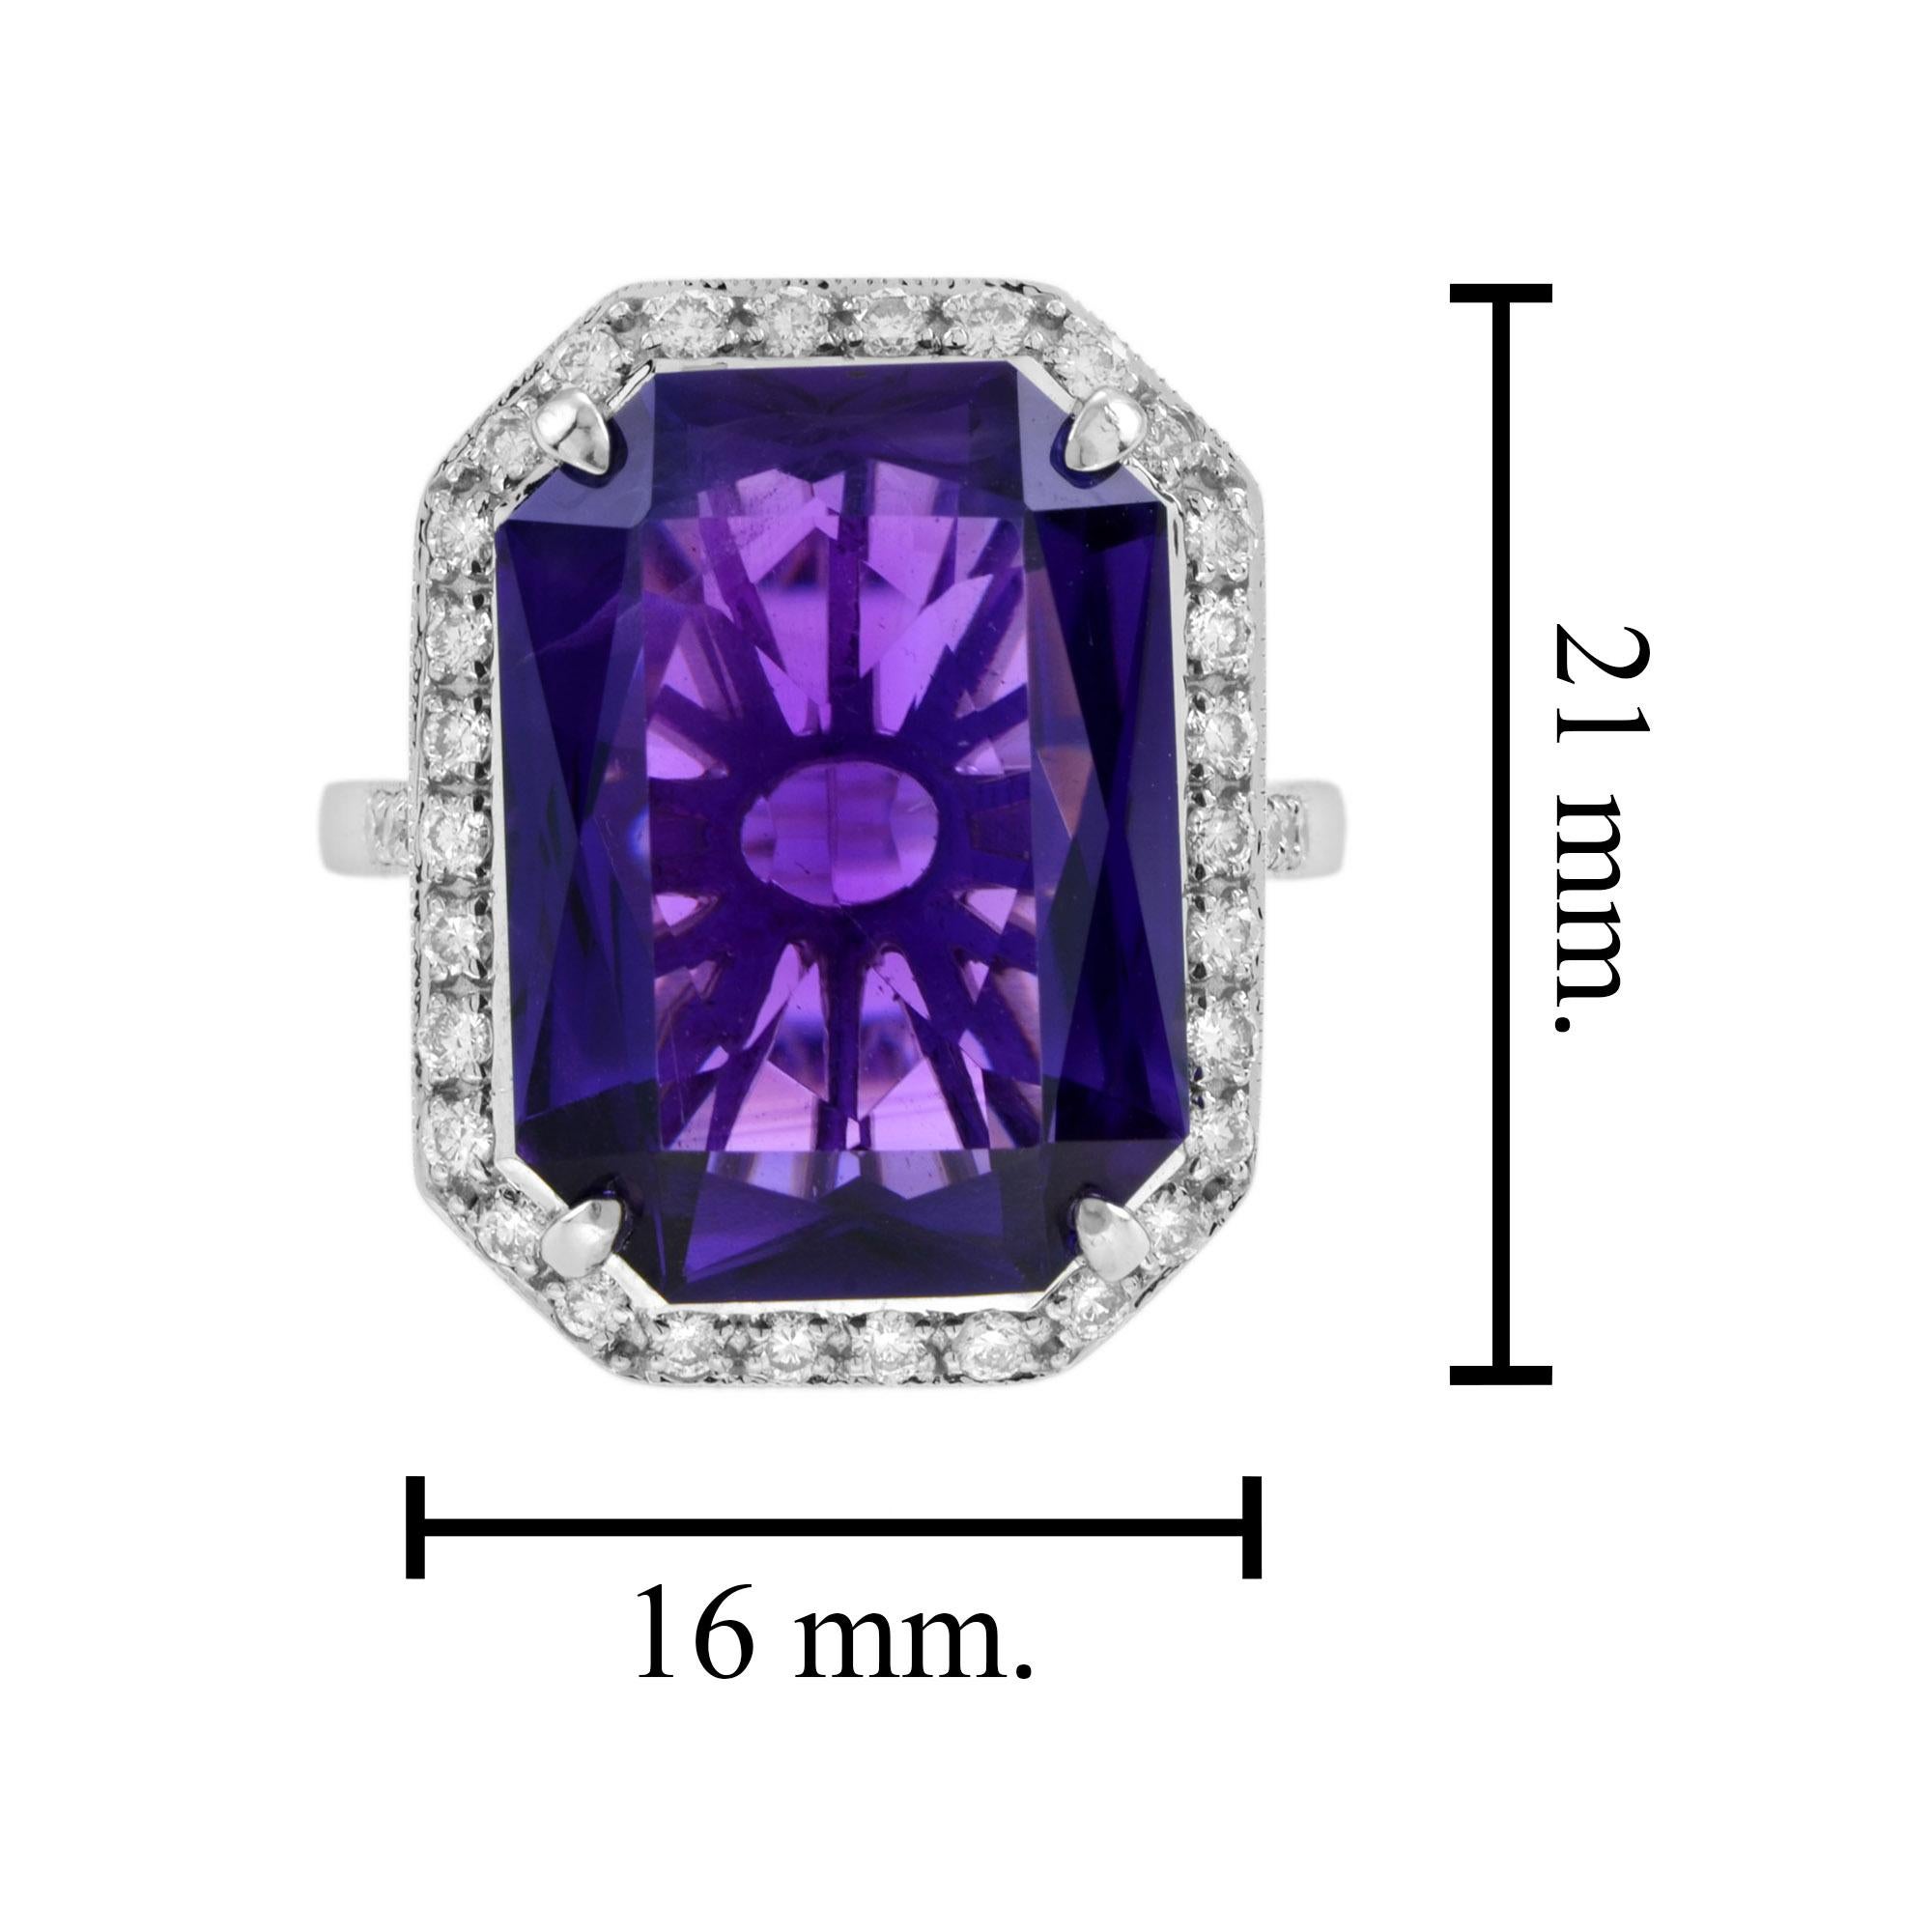 Certified 11.75 Ct. Amethyst and Diamond Halo Art Deco Style Ring in 14K Gold 3